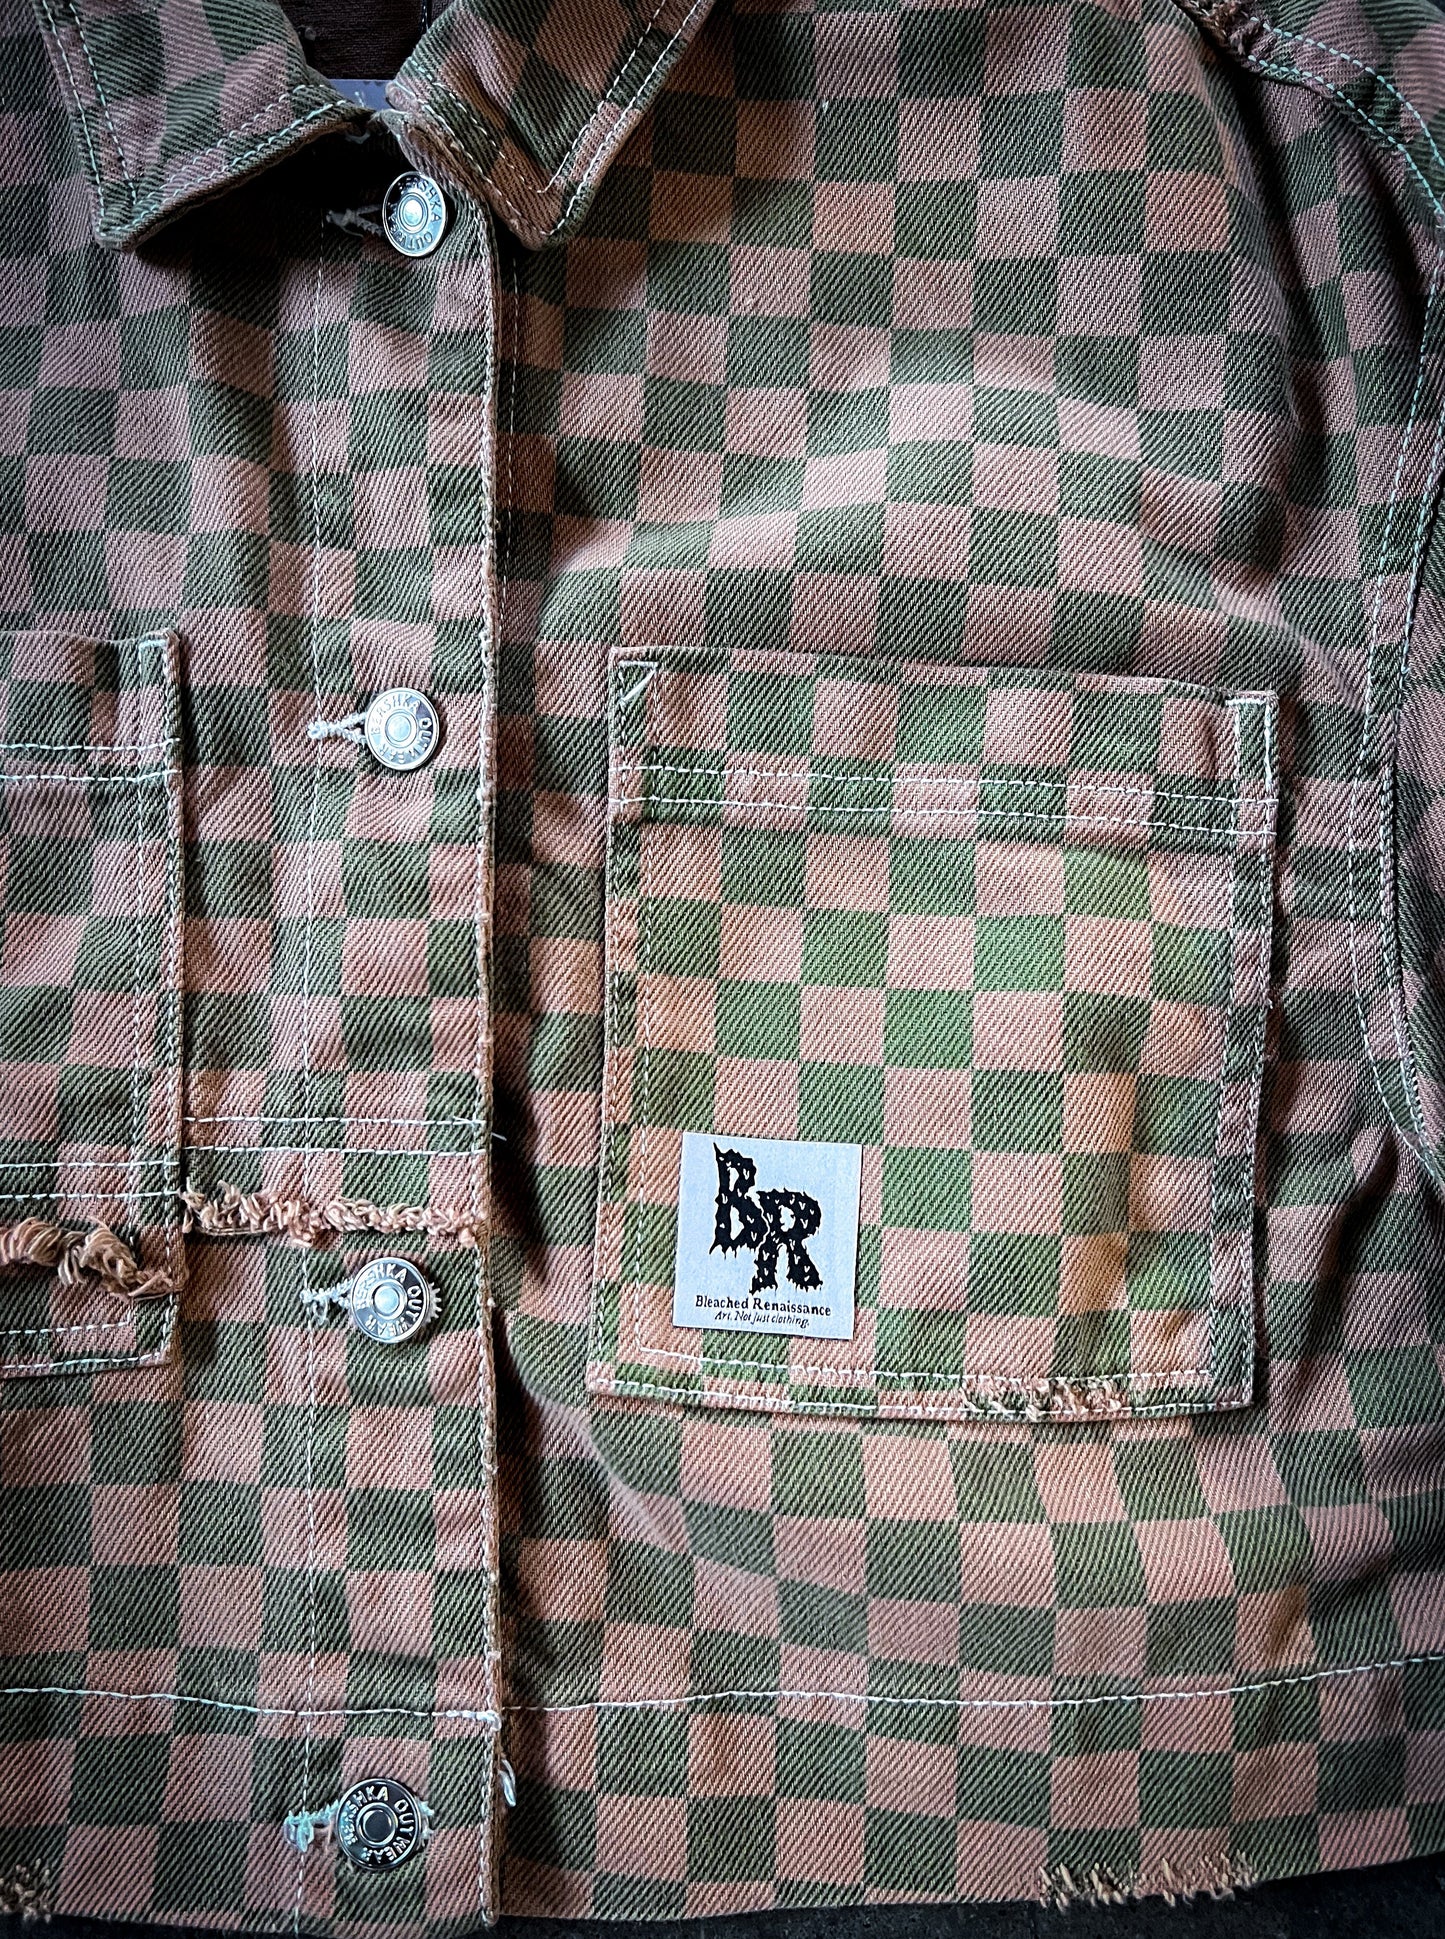 Checkerboard Sleeve Bleached Jacket